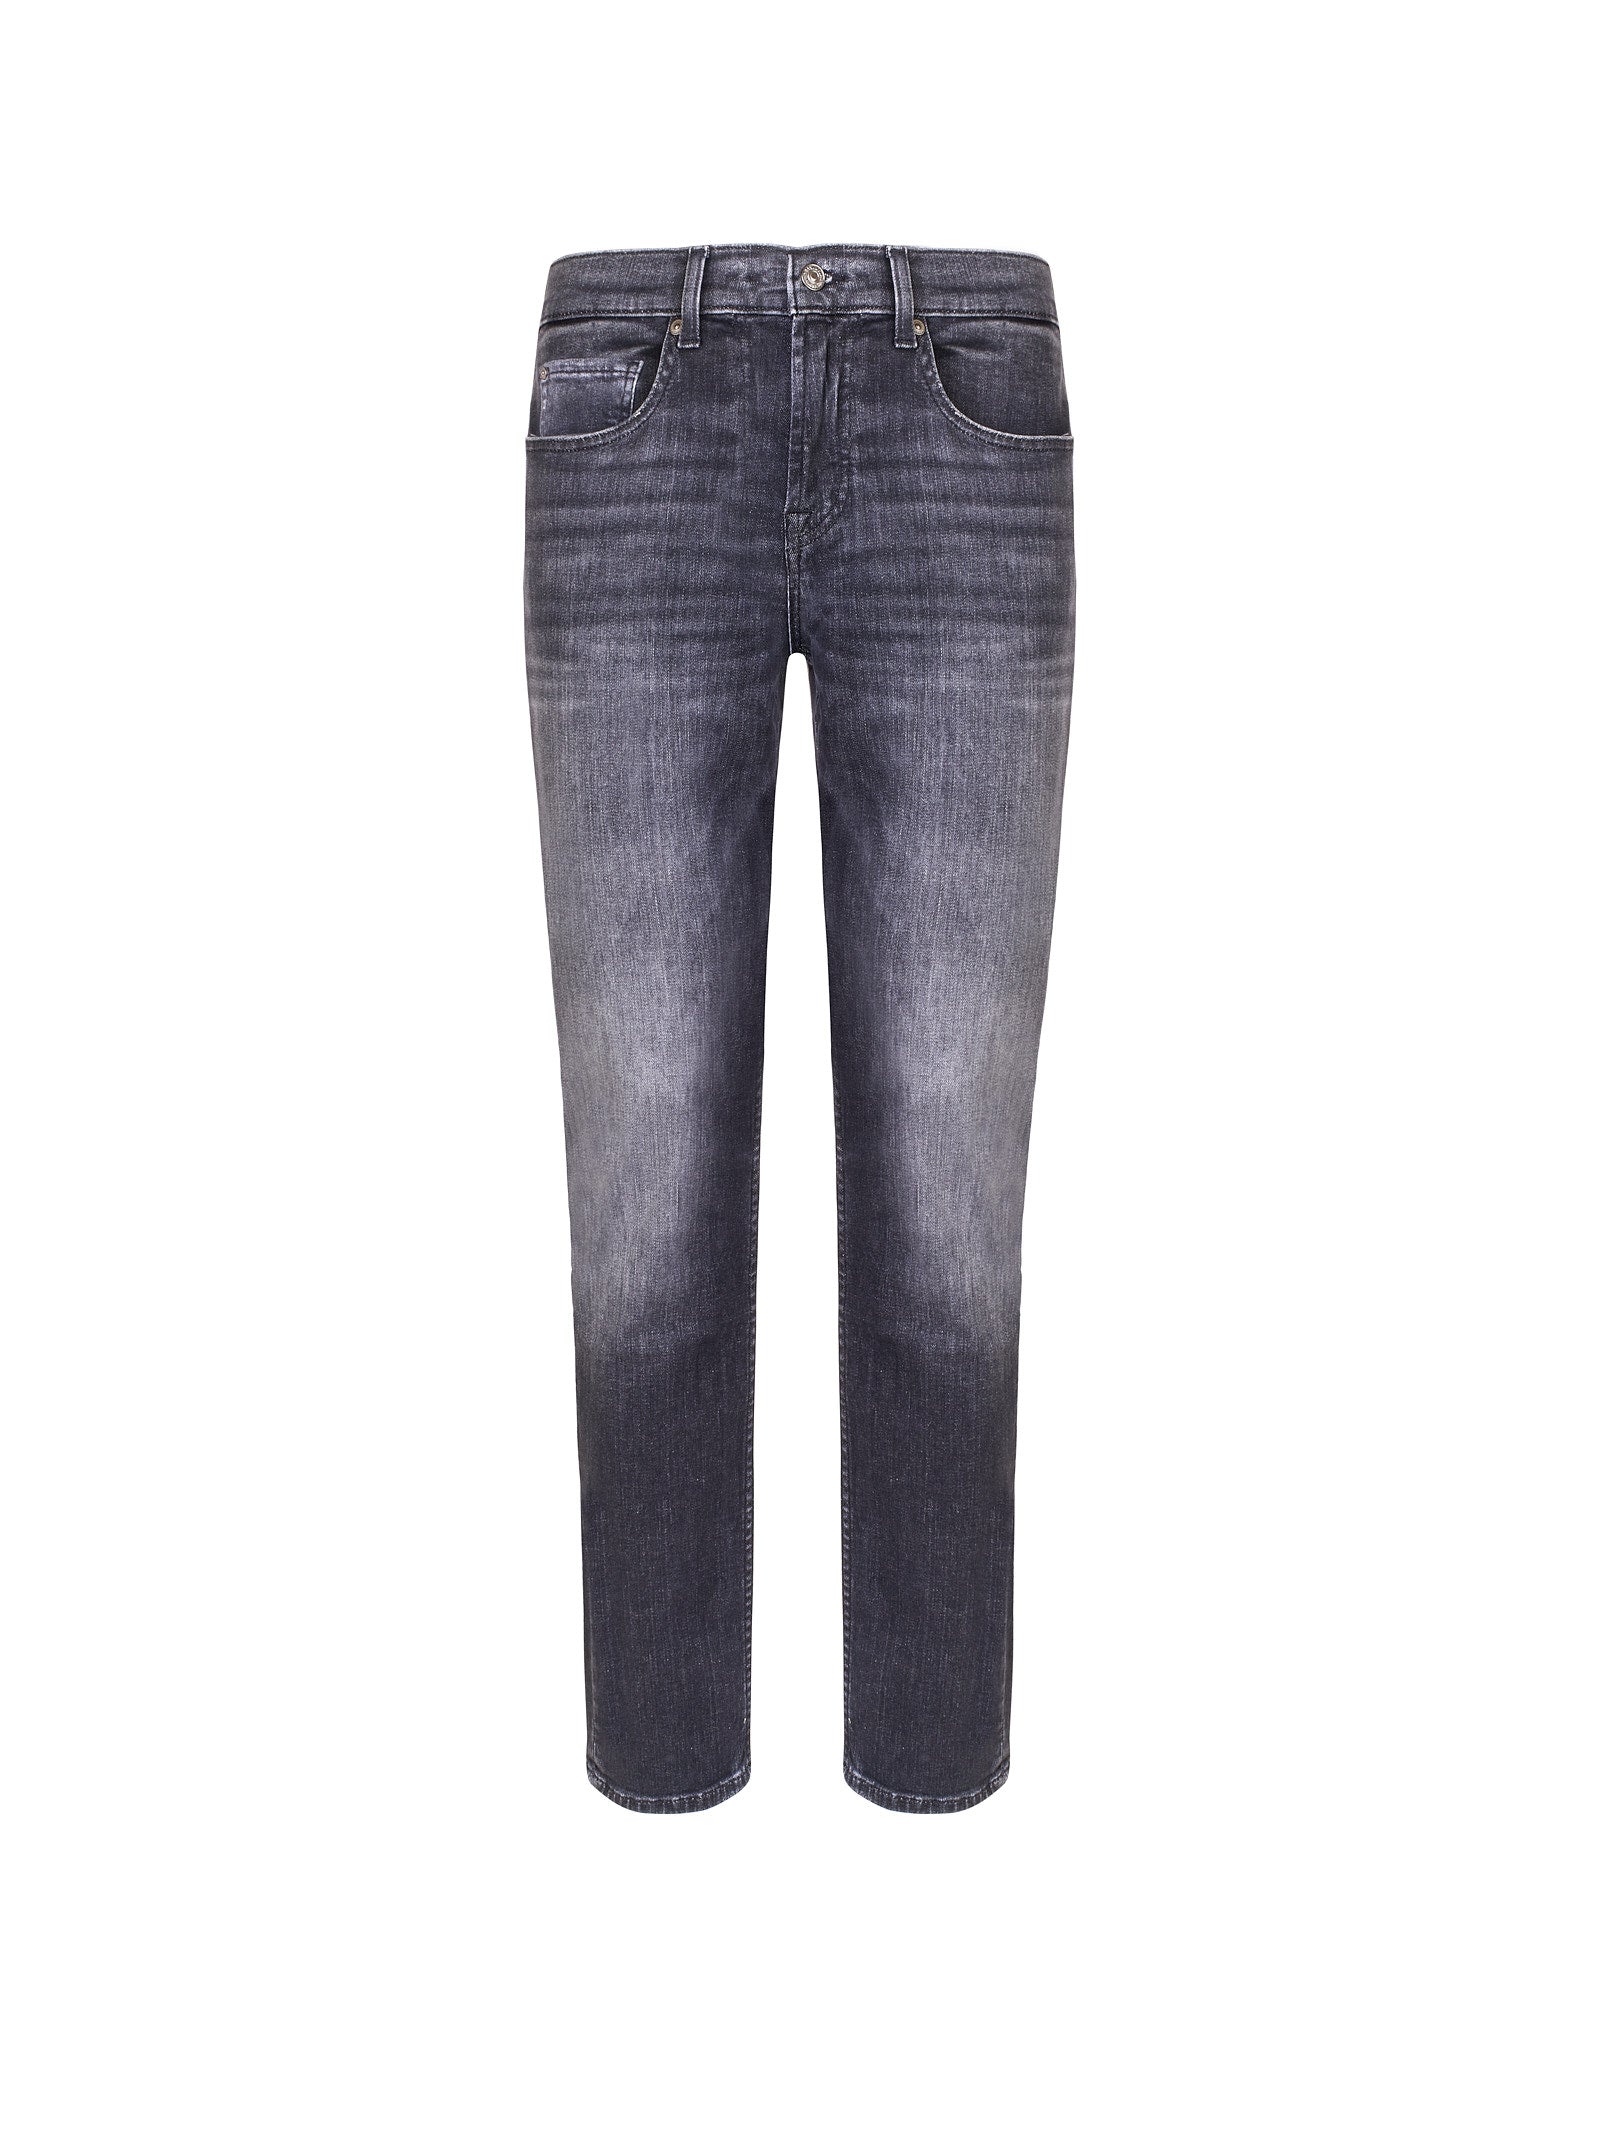 Jeans 7 FOR ALL MANKIND
Nero